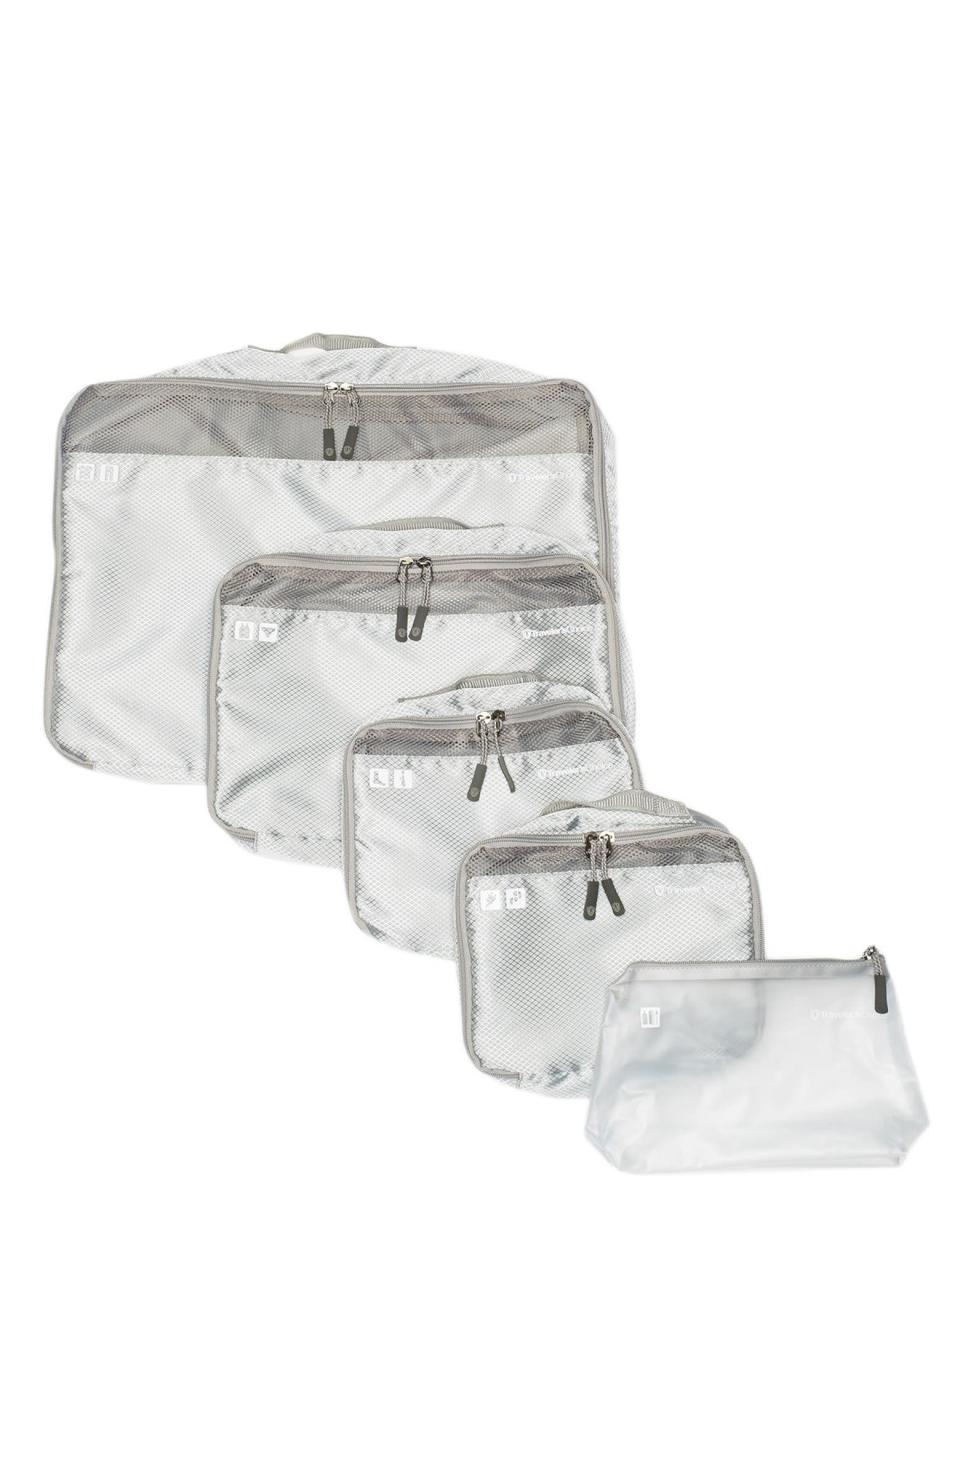 <br><br><strong>Traveler's Choice</strong> 5-Piece Packing Cube Set, $, available at <a href="https://go.skimresources.com/?id=30283X879131&url=https%3A%2F%2Fwww.nordstromrack.com%2Fs%2Ftravelers-choice-5-piece-packing-cube-set%2F5995773" rel="nofollow noopener" target="_blank" data-ylk="slk:Nordstrom Rack" class="link ">Nordstrom Rack</a>